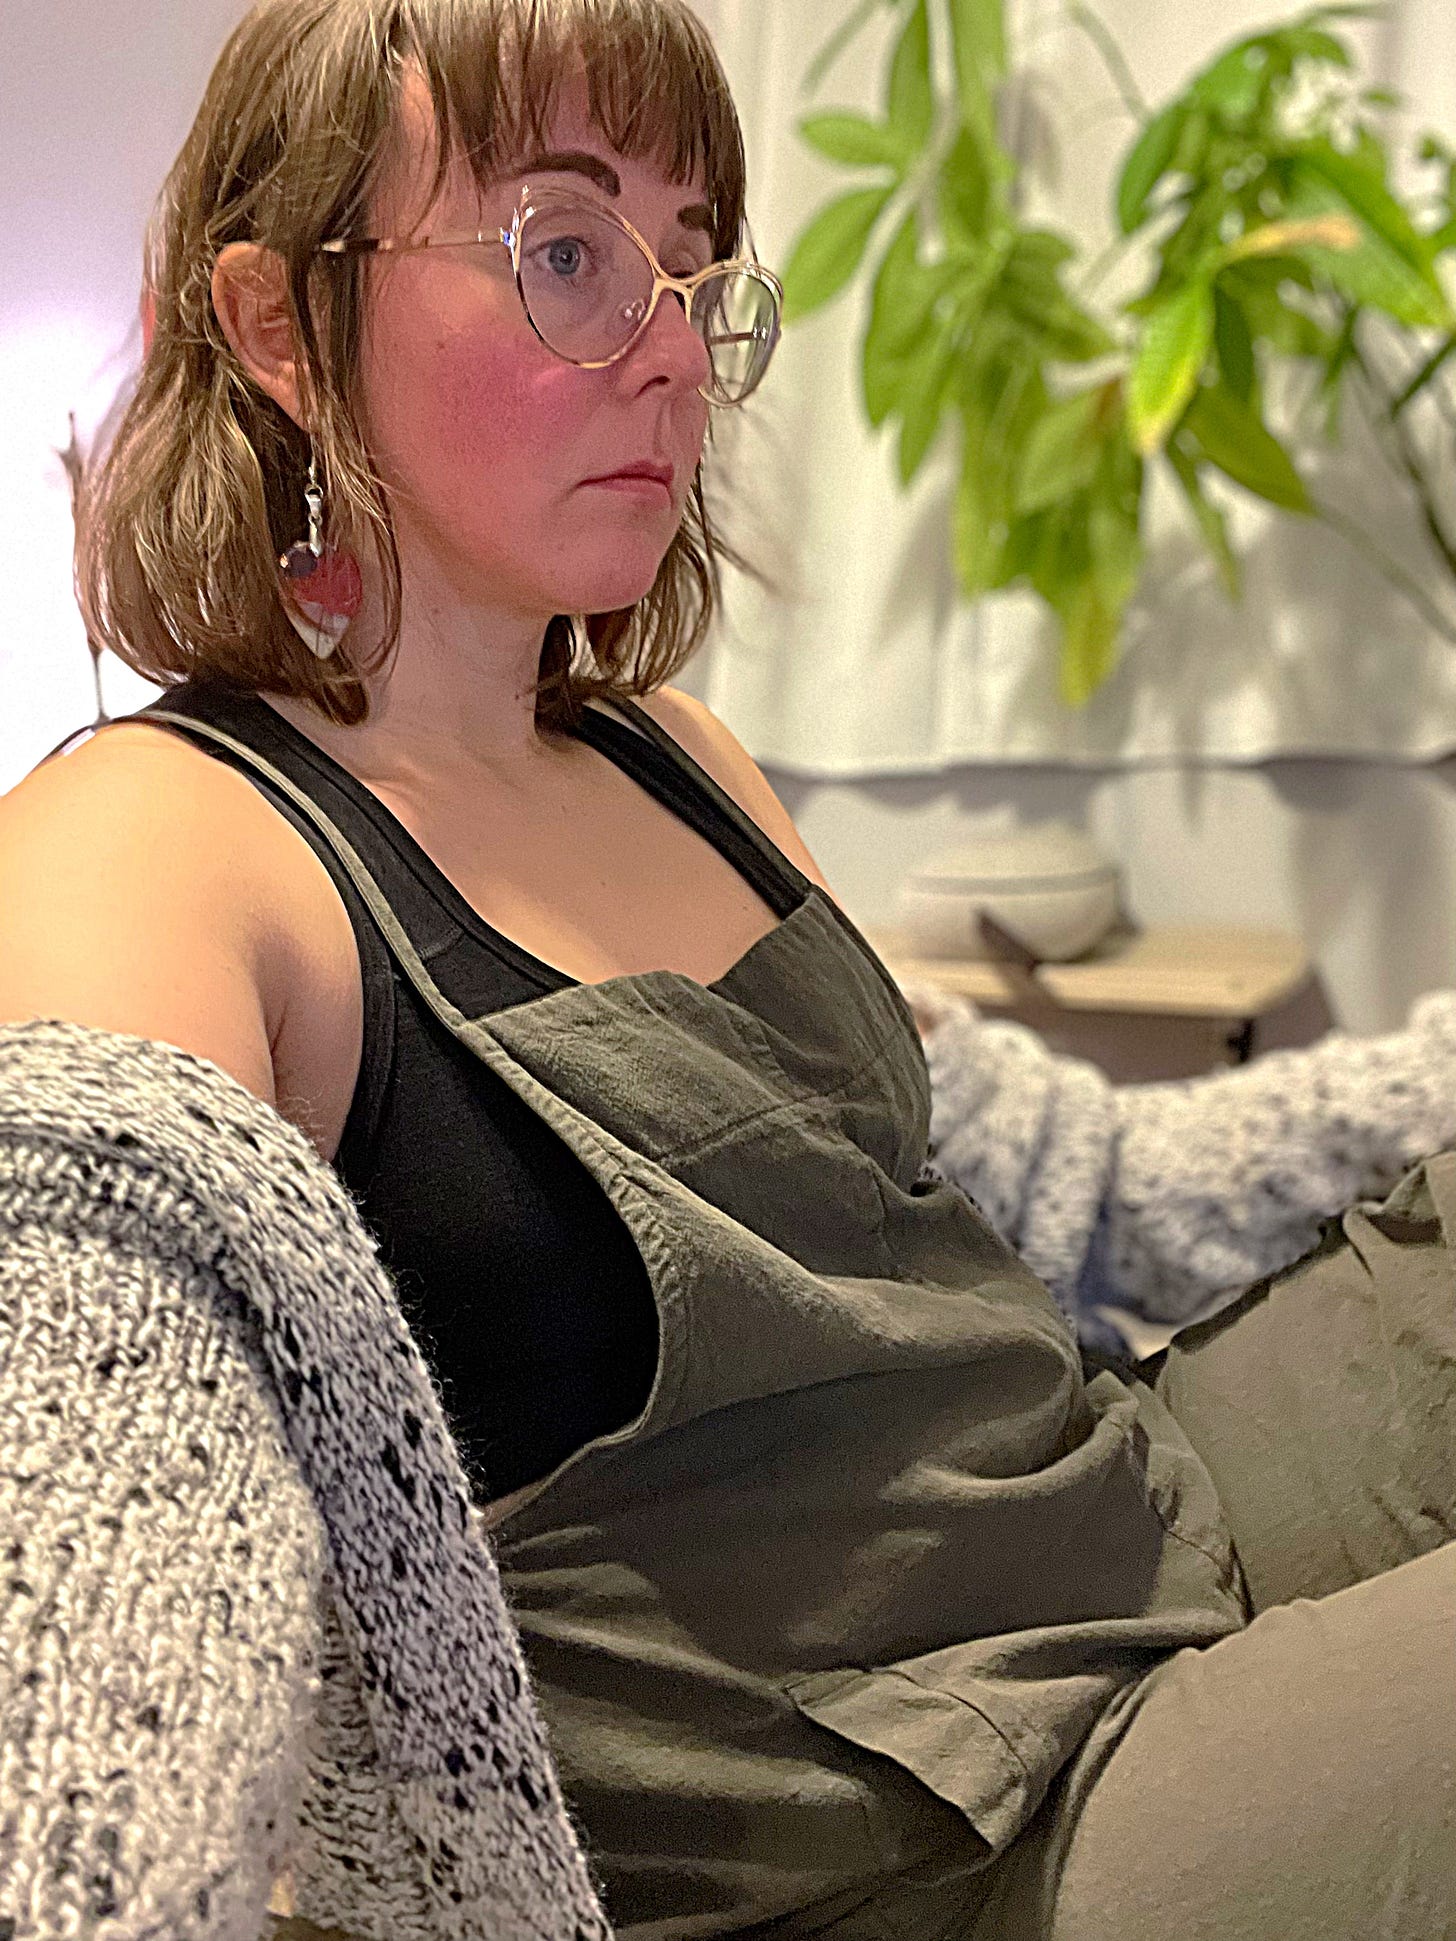 Dr. bird in gold cat eye glasses, red and white tear drop acrylic earrings, a black sports bra, green overalls, and a white cardigan with black speckles.